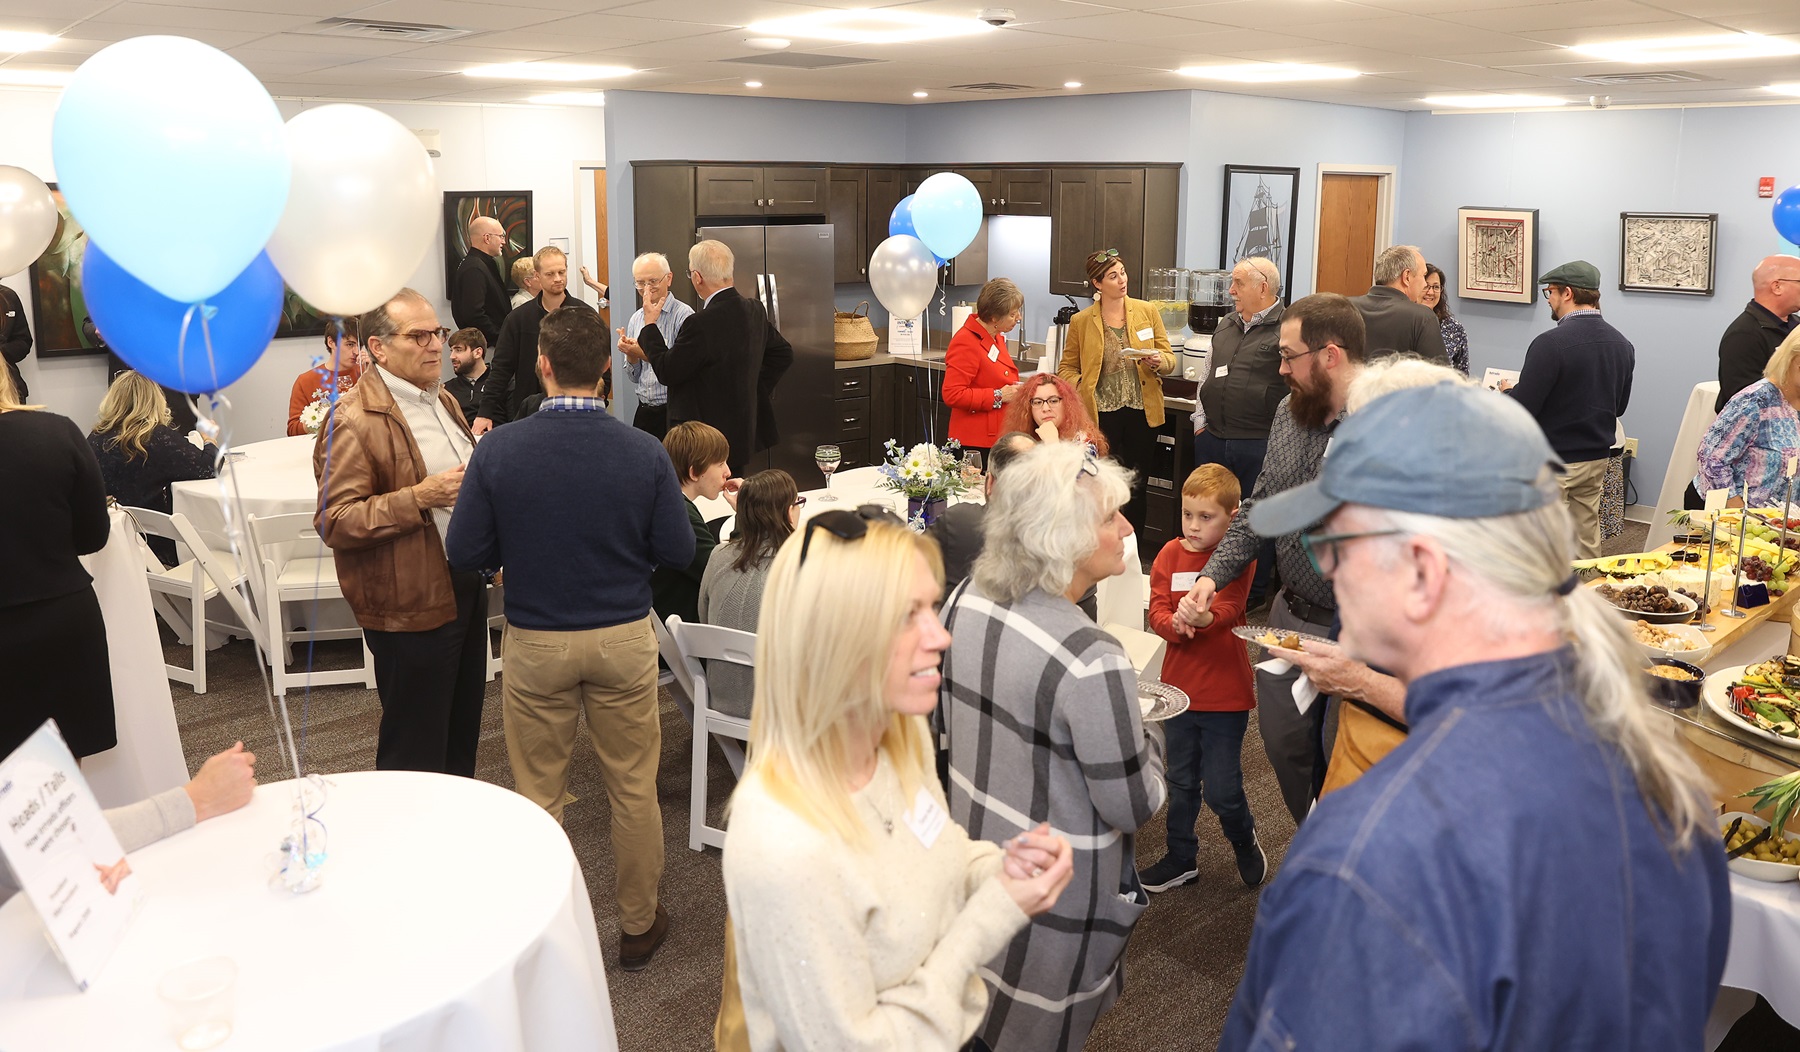 festivities at the intrada open house